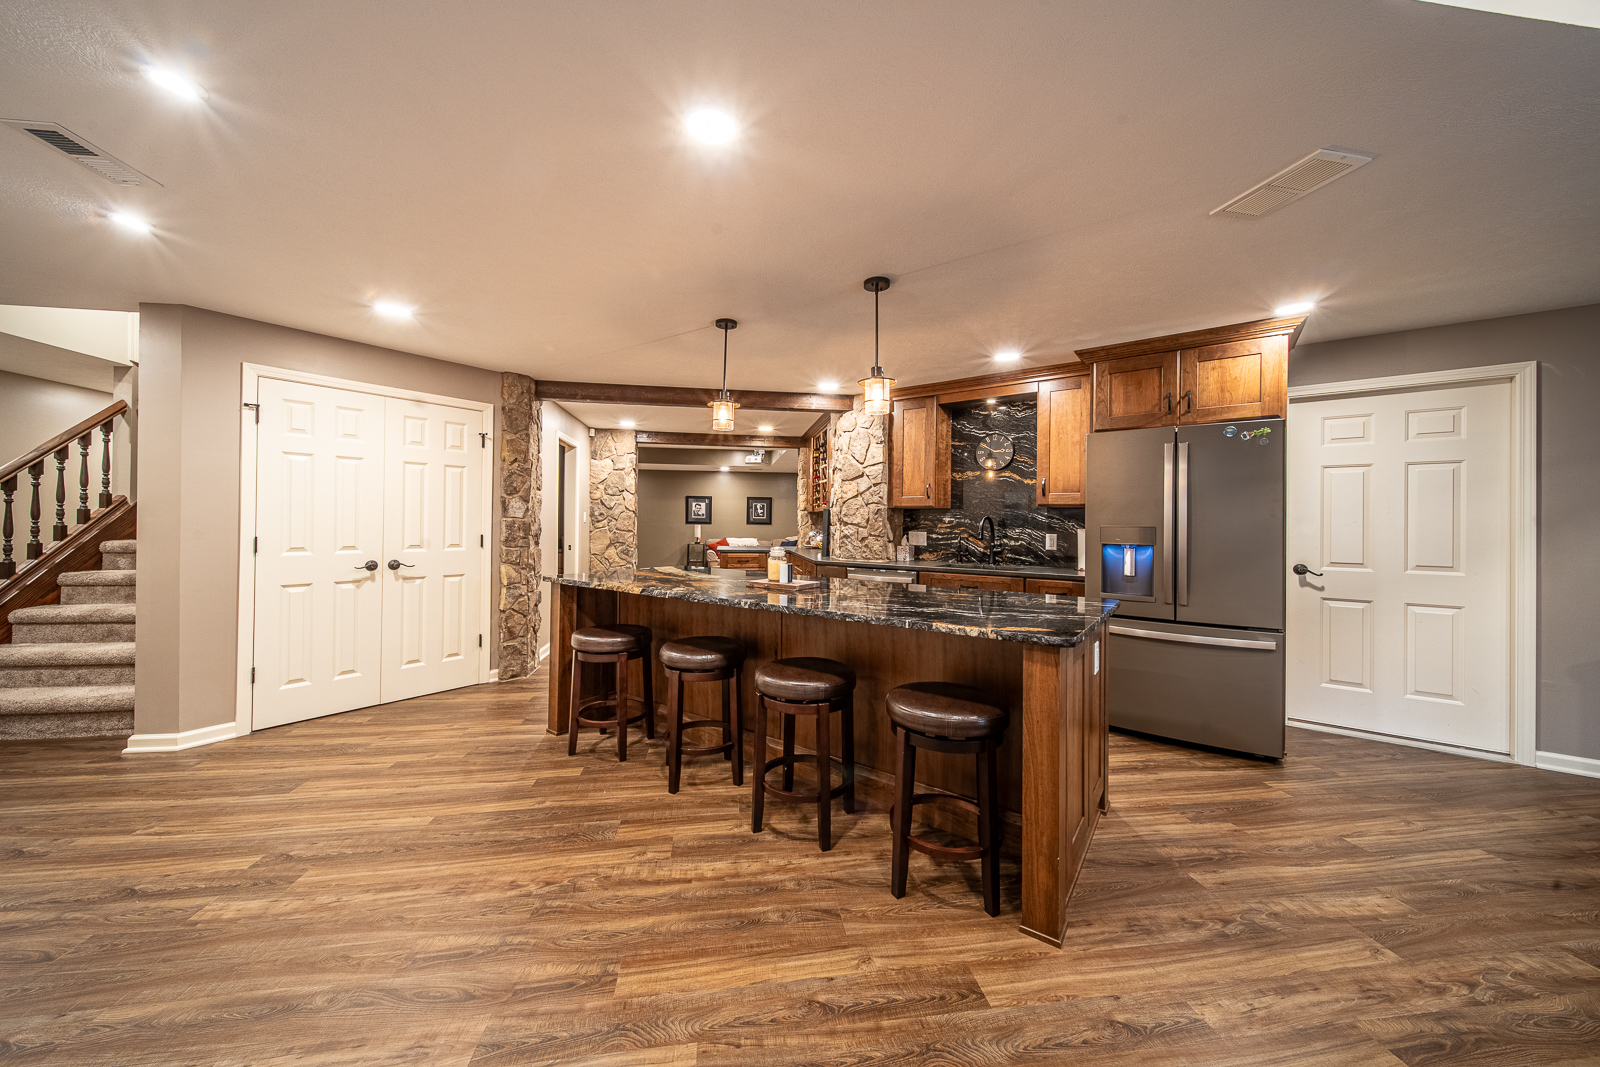 Spacious basement kitchen with island and bar seating in Ripple Creek Drive remodel.